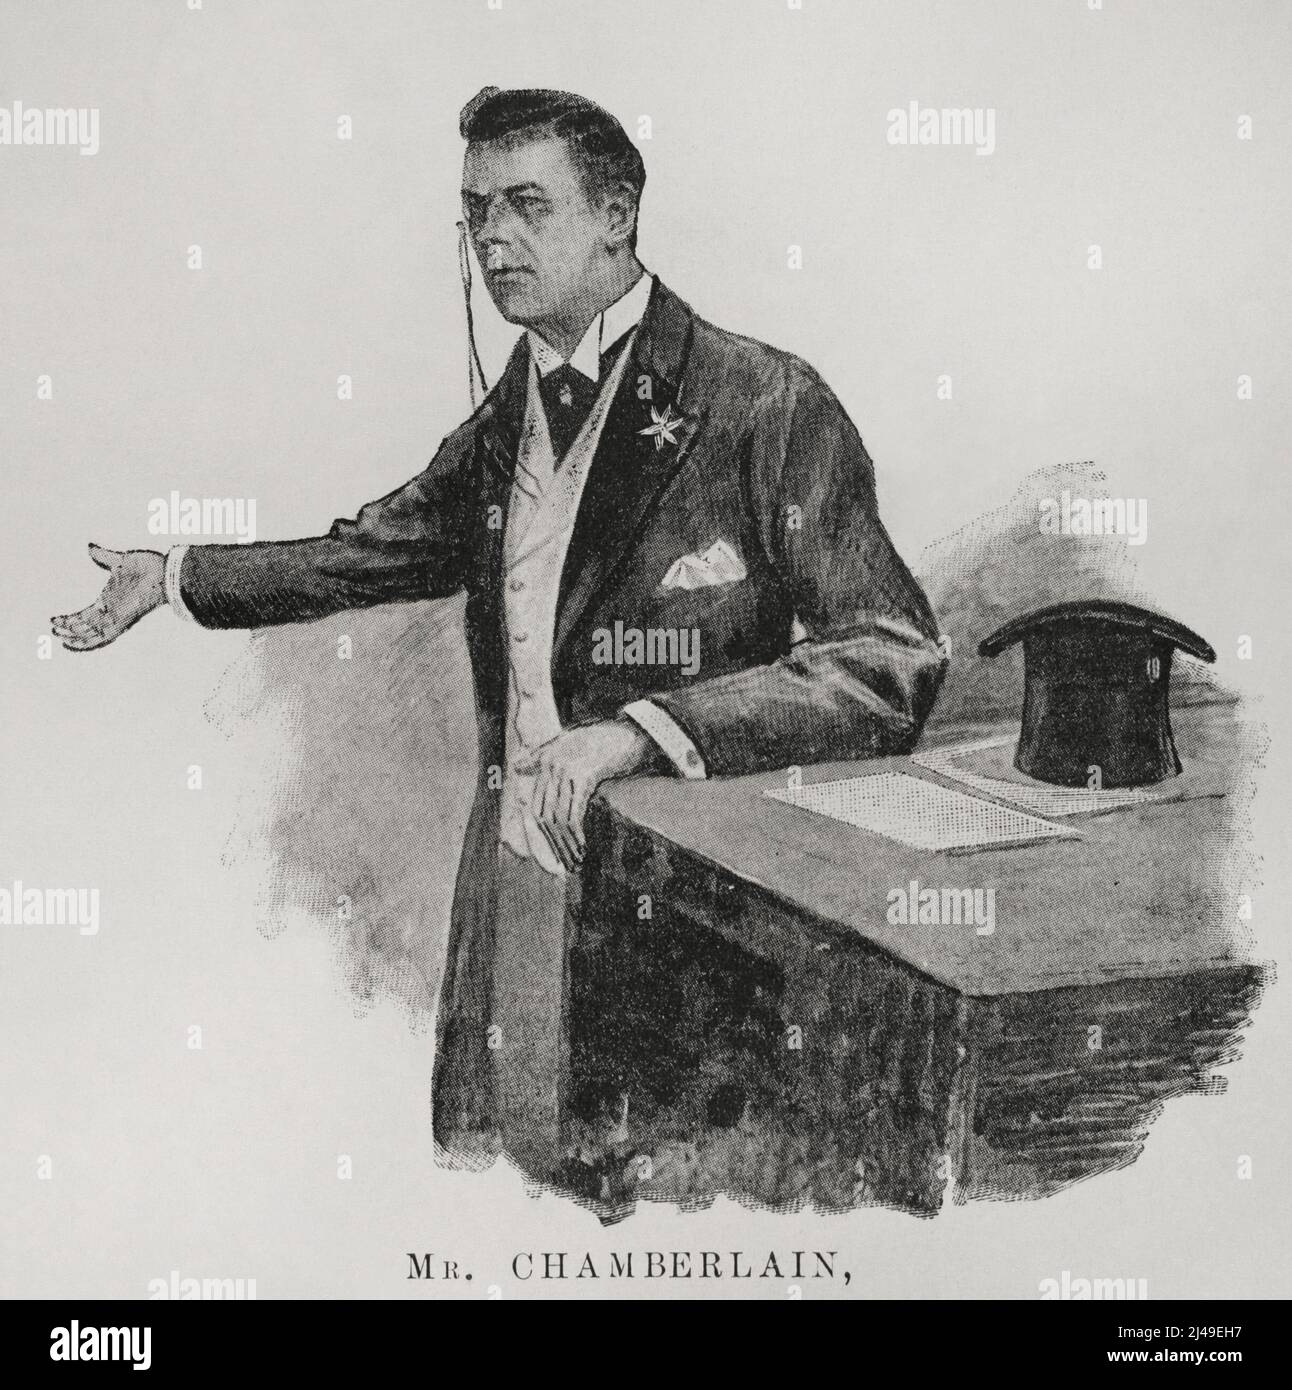 Joseph Chamberlain (1836-1914). British politician. Defender of imperialism in foreign policy. Chamberlain, Secretary of State for the Colonies, pronouncing his famous speech in Birmingham on 12 April 1898, in which he spoke of England's alliance with the United States. Photoengraving. La Ilustración Española y Americana, 1898. Stock Photo